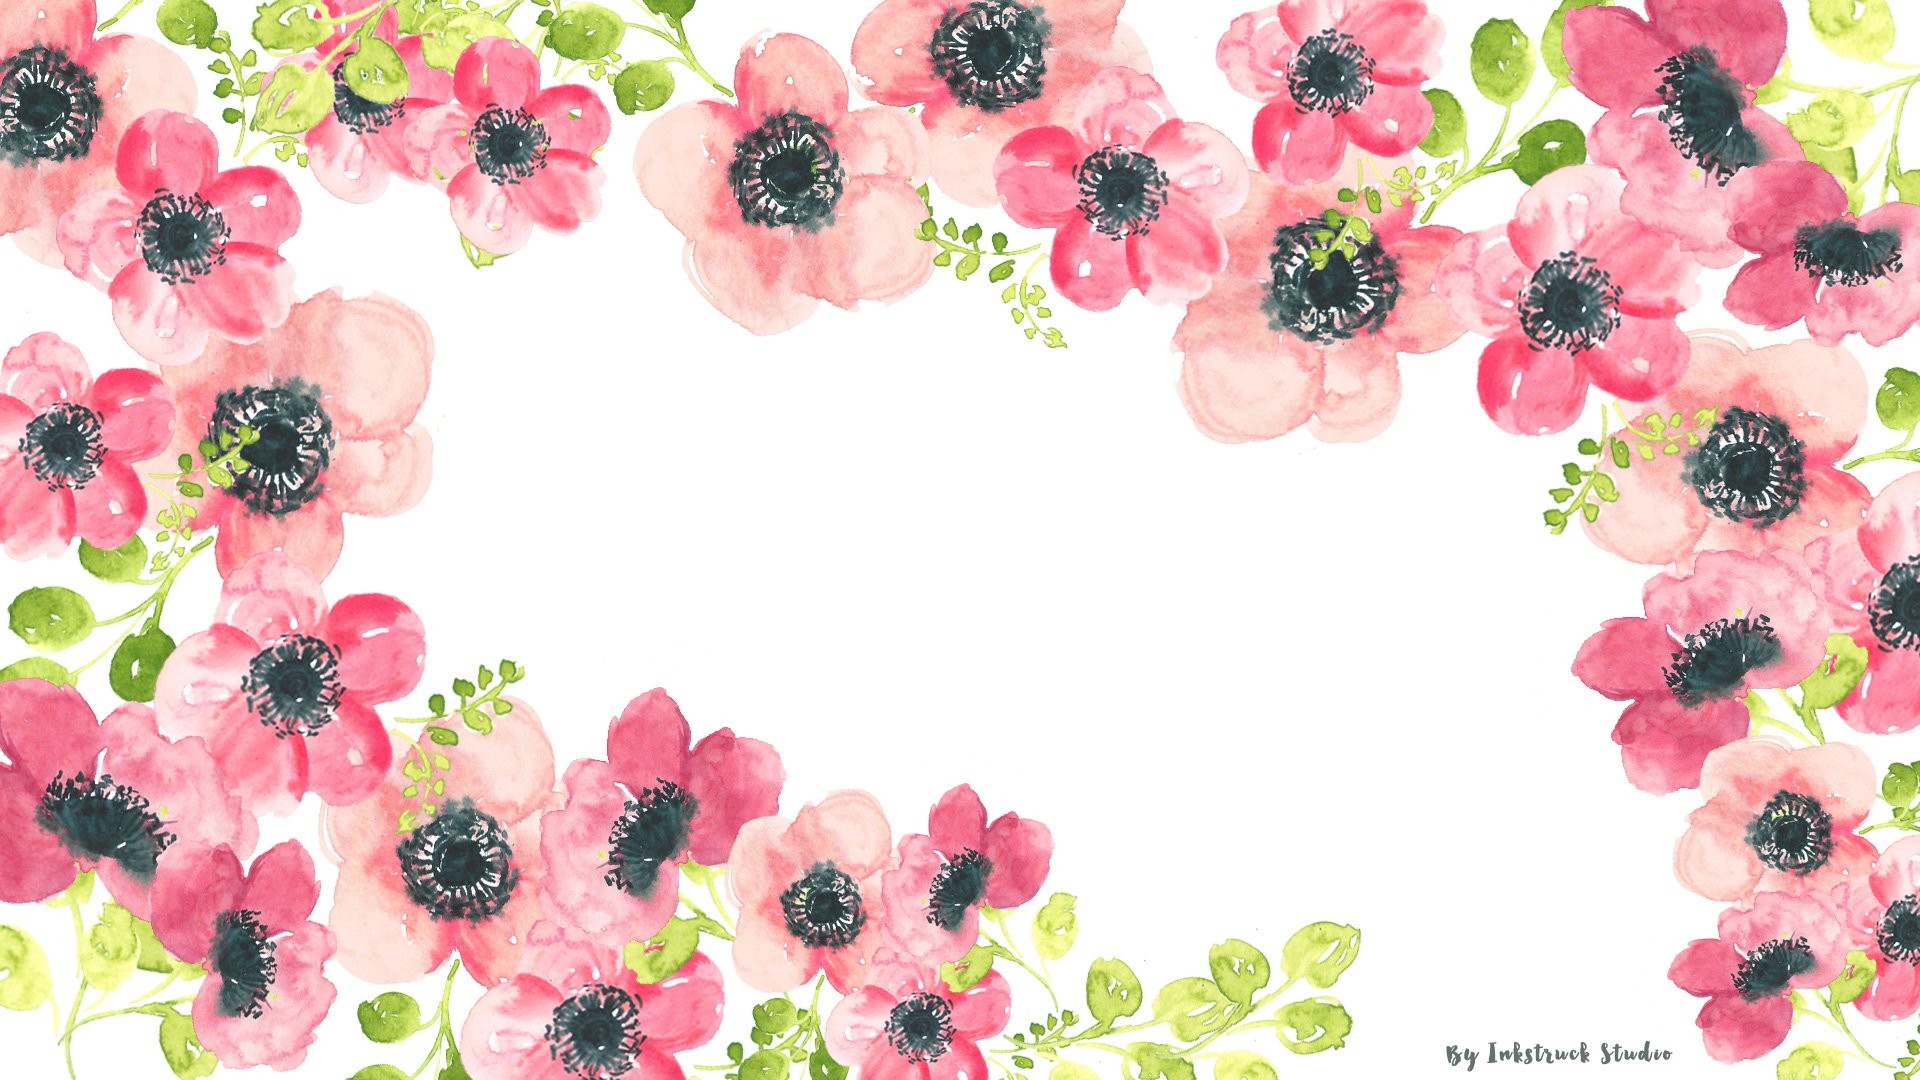 1920x1080 Download the choice of your watercolor floral wallpapers by clicking the  links below:-